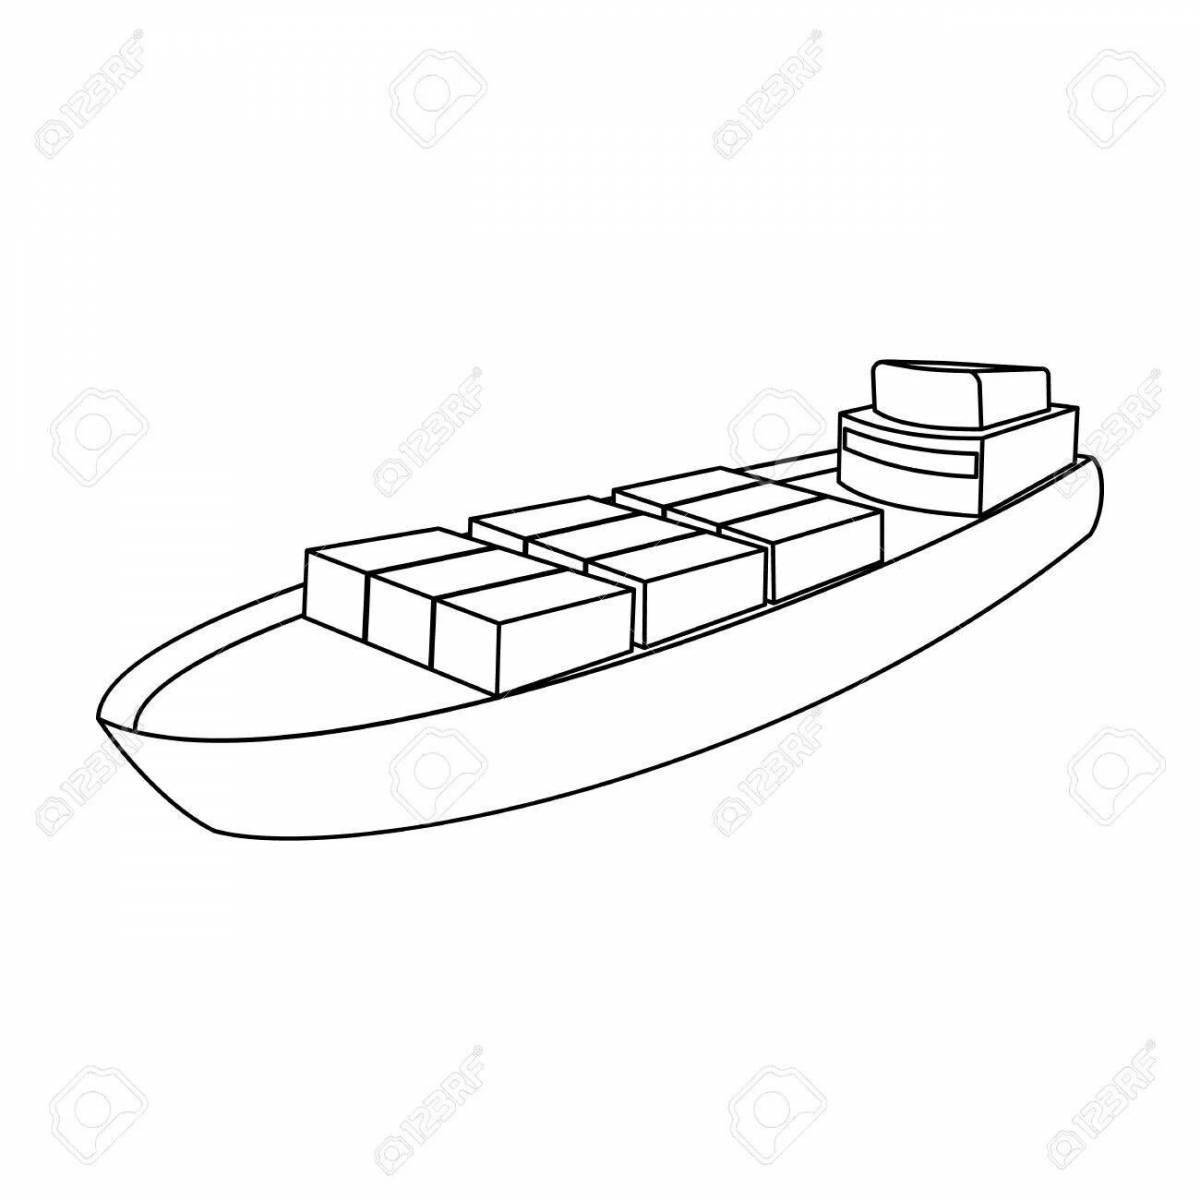 Flawless Tanker coloring page